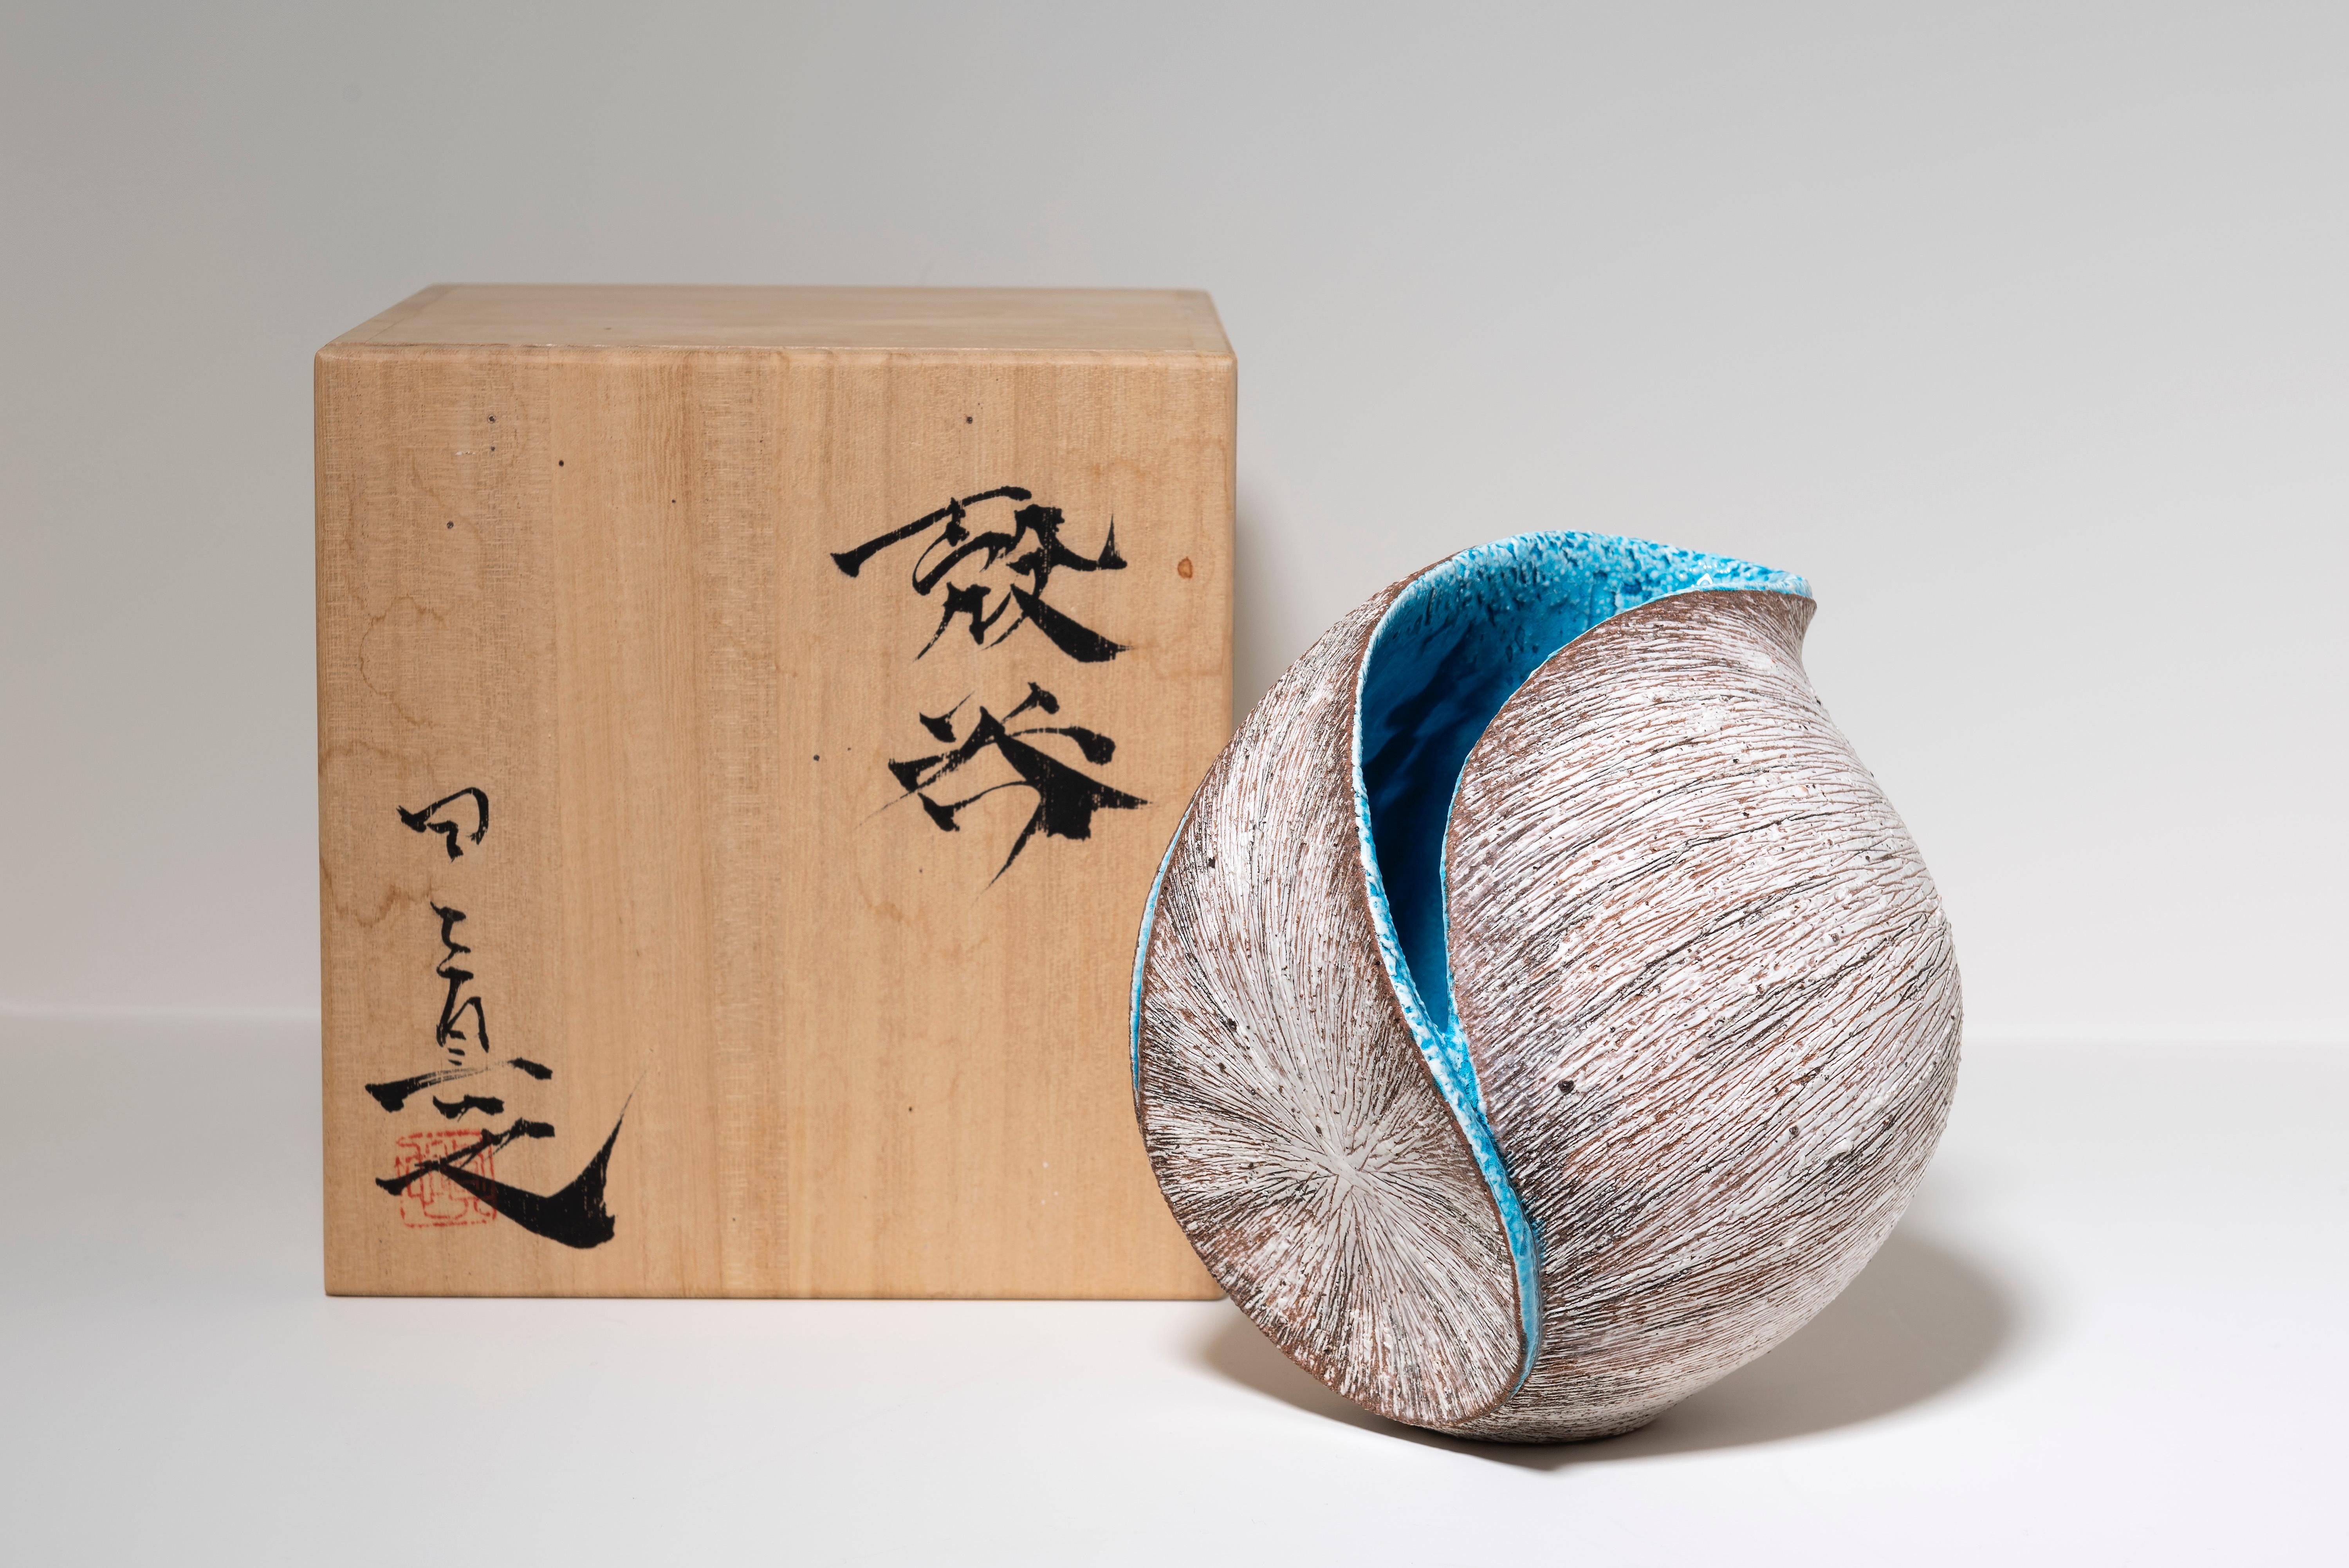 Tanoue Shinya,  is a ceramic artist from Kyoto. His work is already placed in the Museum of Kyoto and the Hyogo Ceramic Art Museum as well as being shown at US museums (Cincinnati, Phoenix, Crocker) as part of the Horvitz Collection of Contemporary